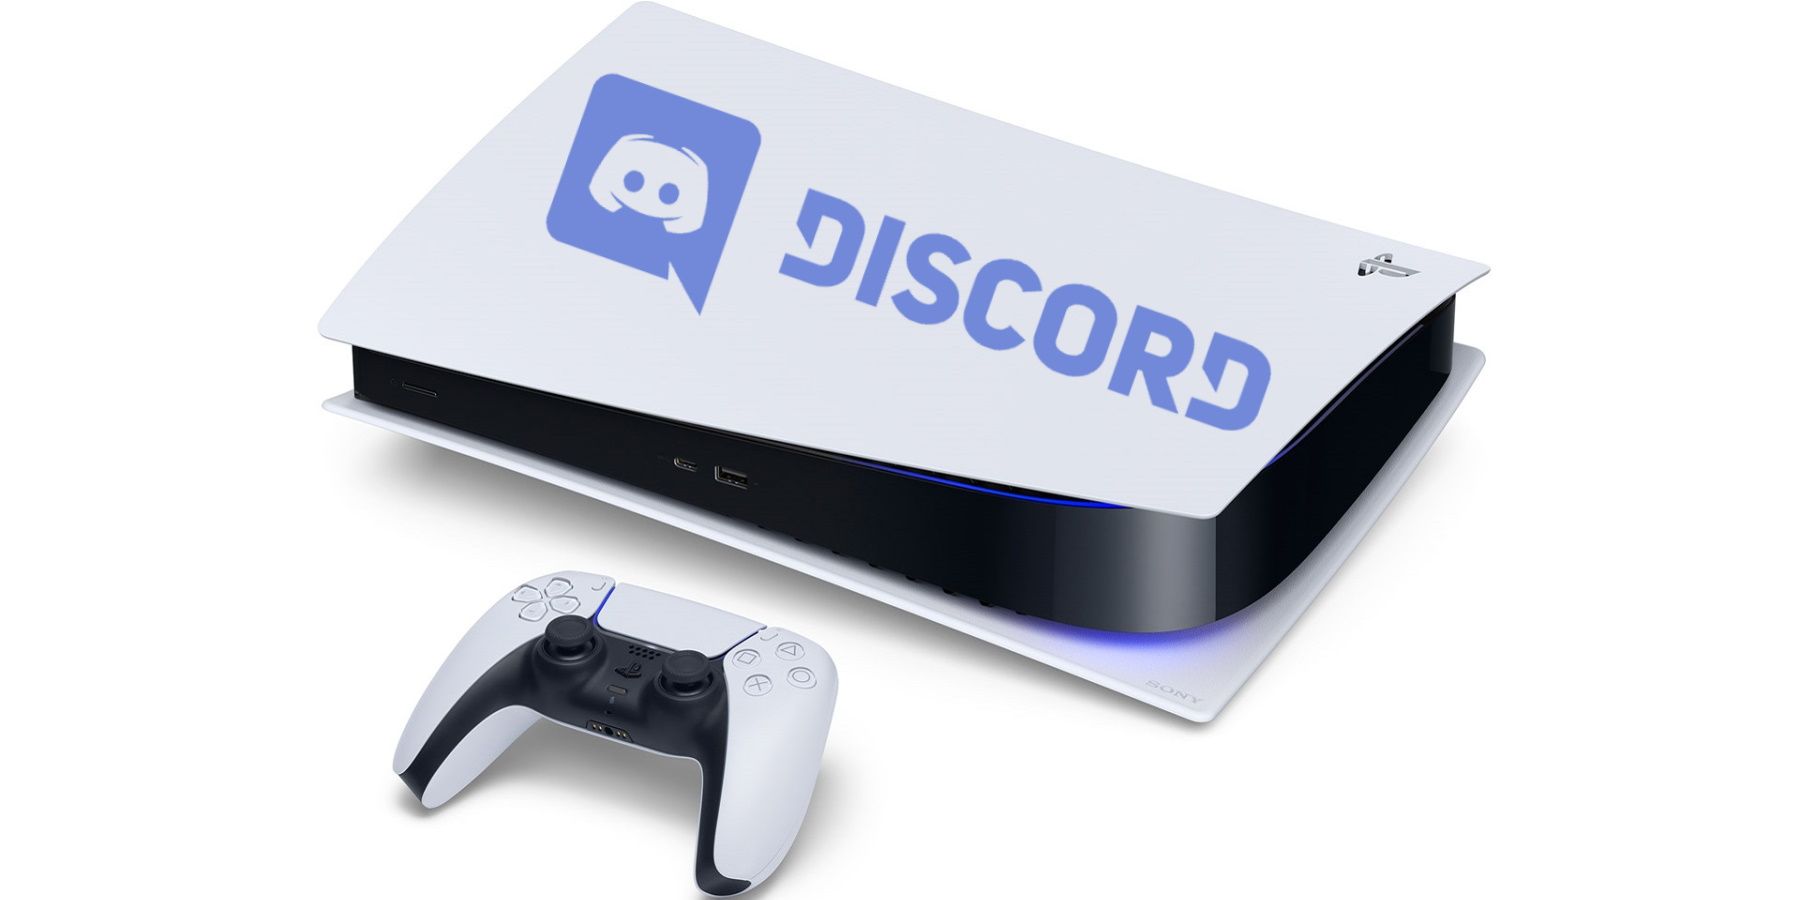 PS5 with a Discord logo on the top